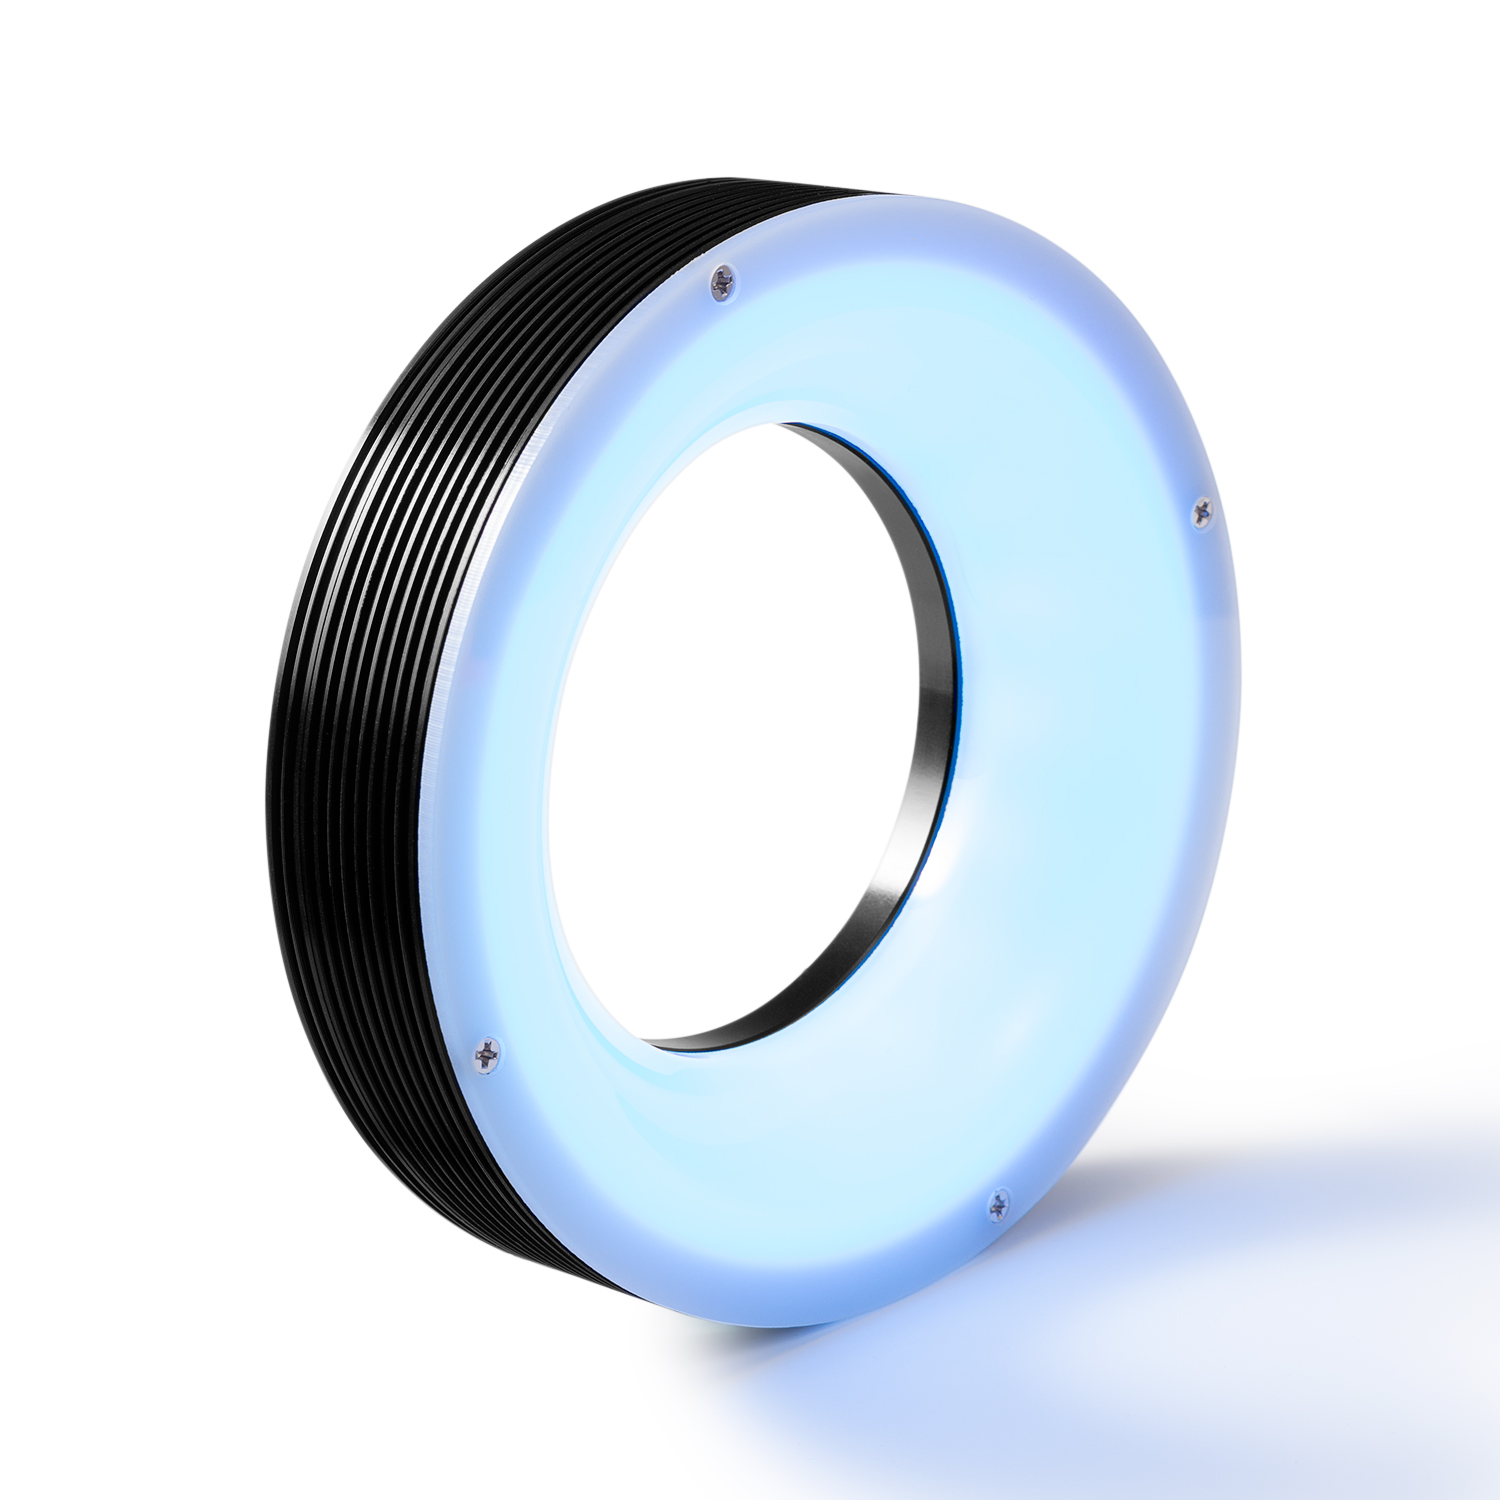 Shadowless Ring Lighting (White/Red/Blue) for Electronic Component Inspection, Etc.